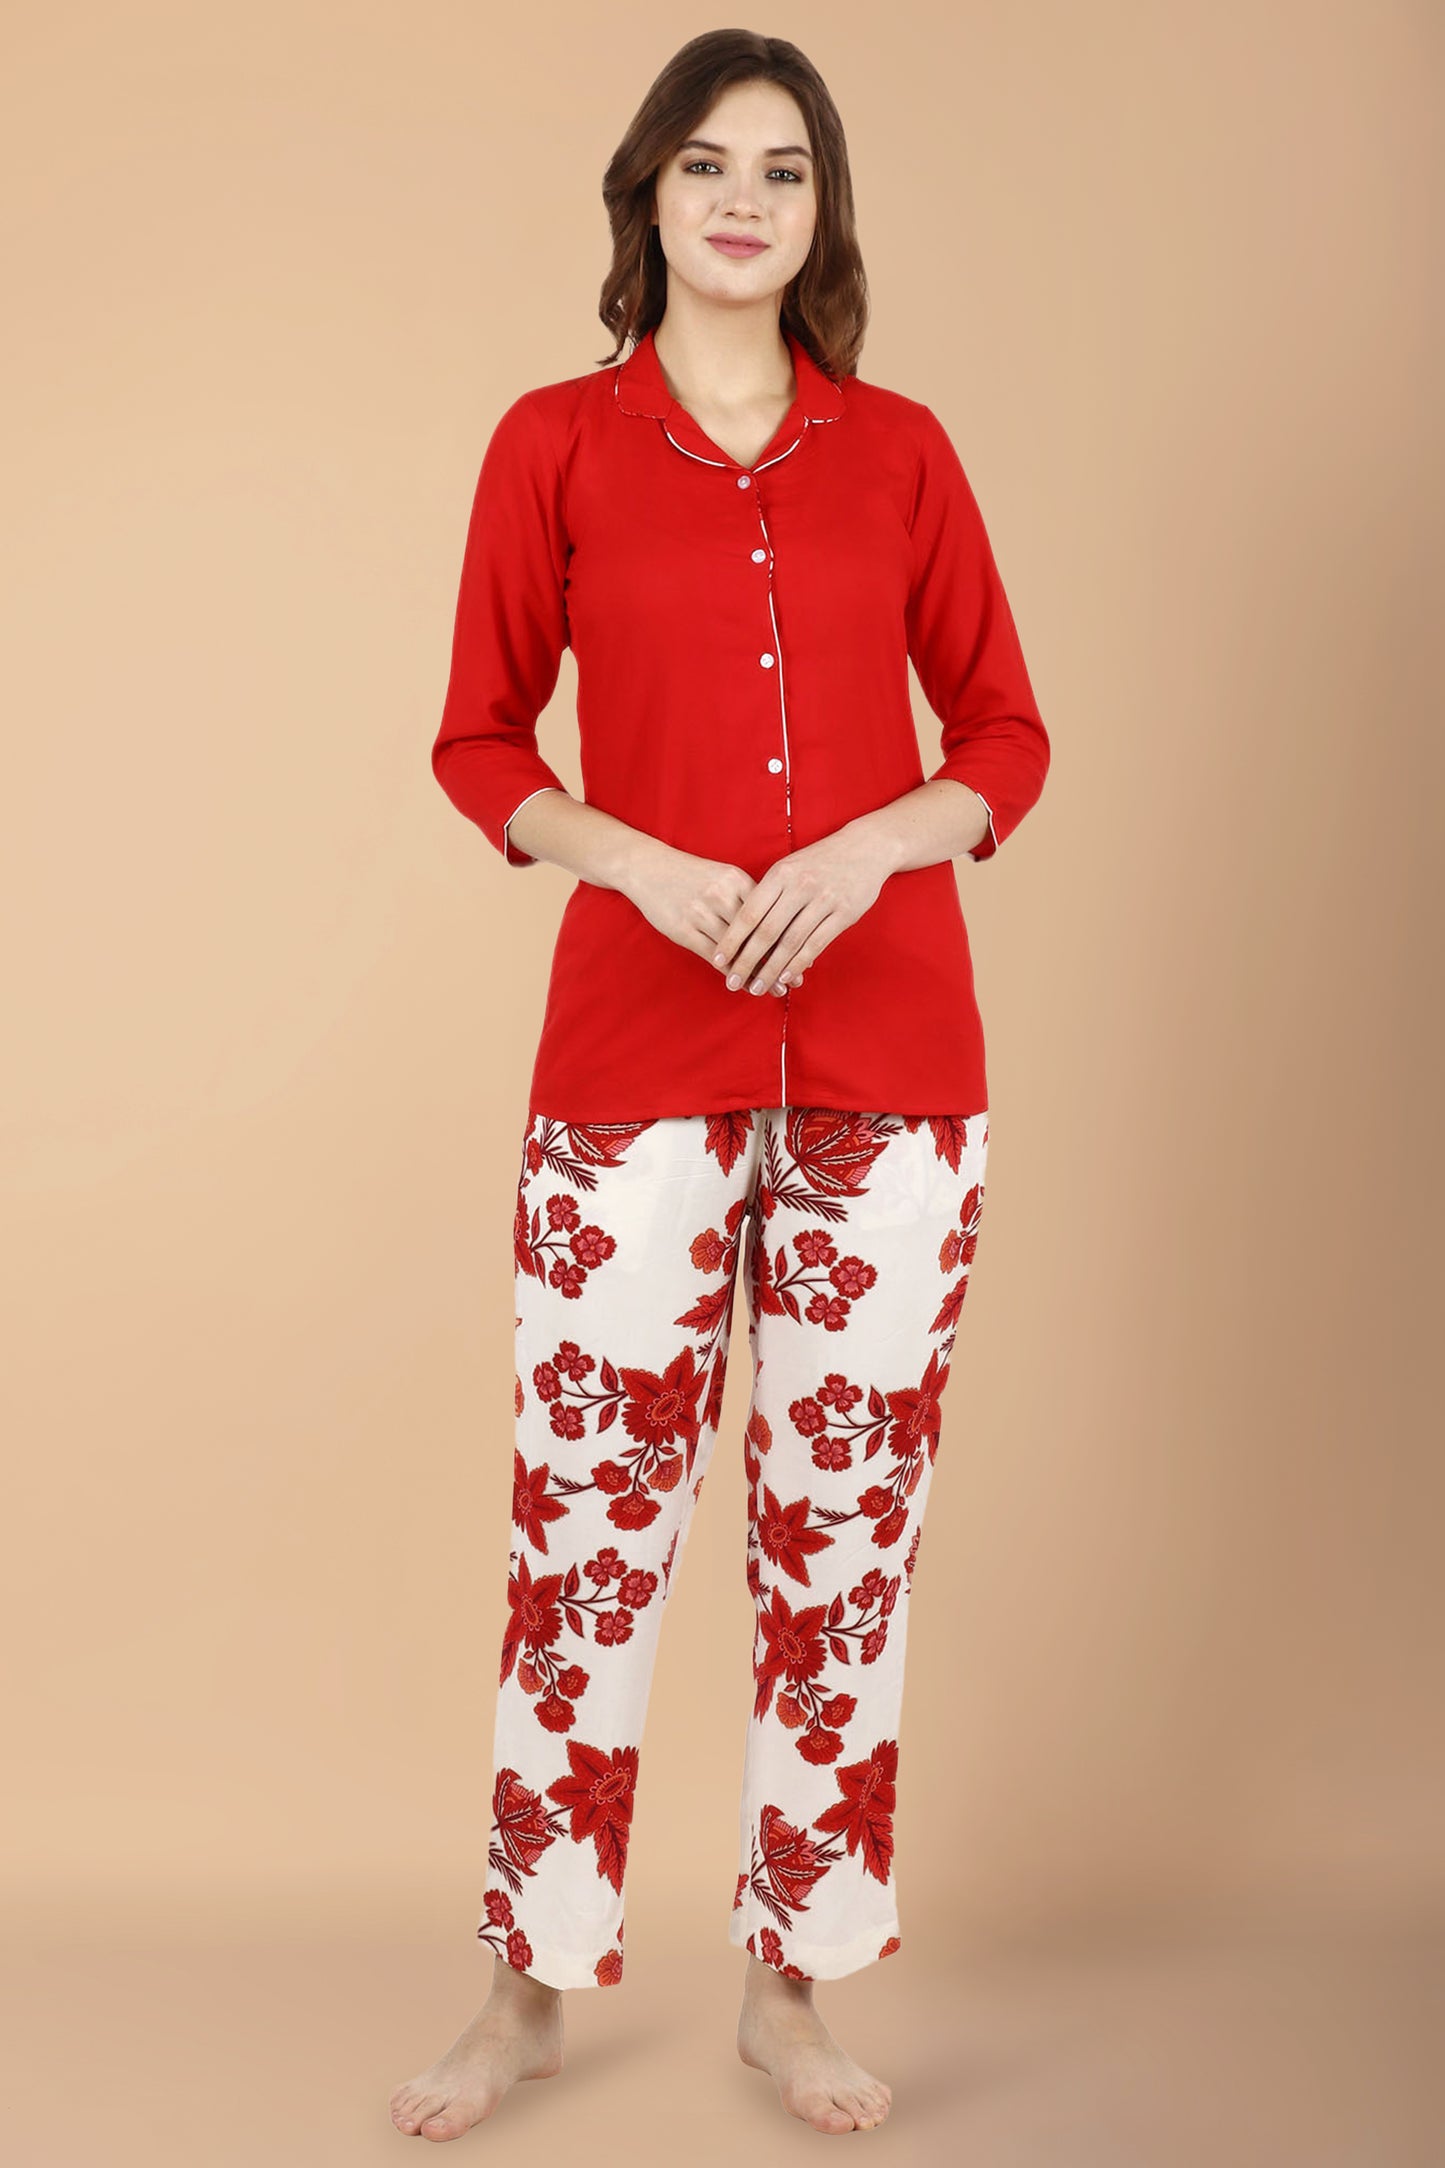 Cute Night Suits For Women 